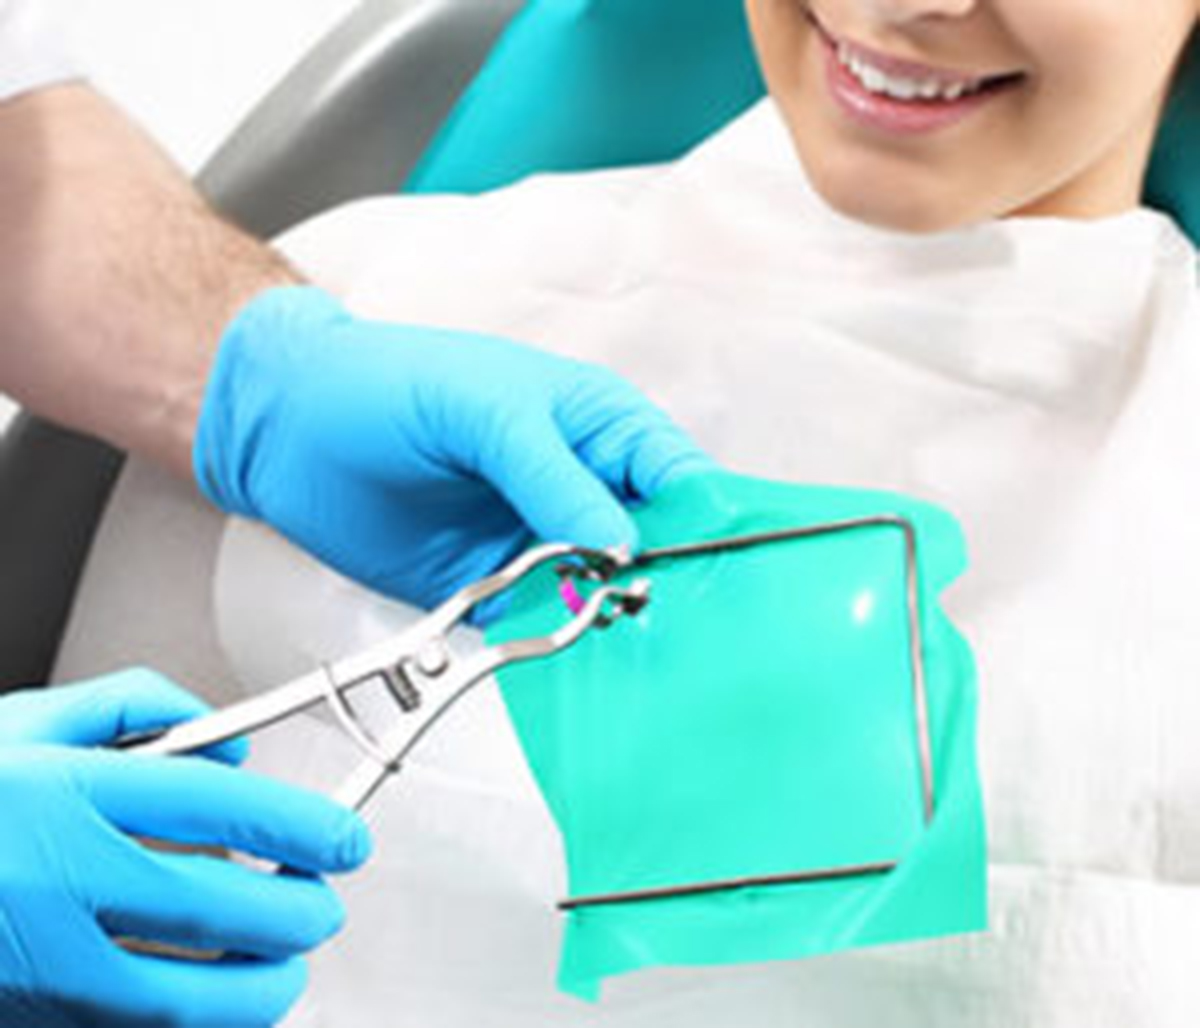 Ozone therapy skowhegan Maine for root canal treatment